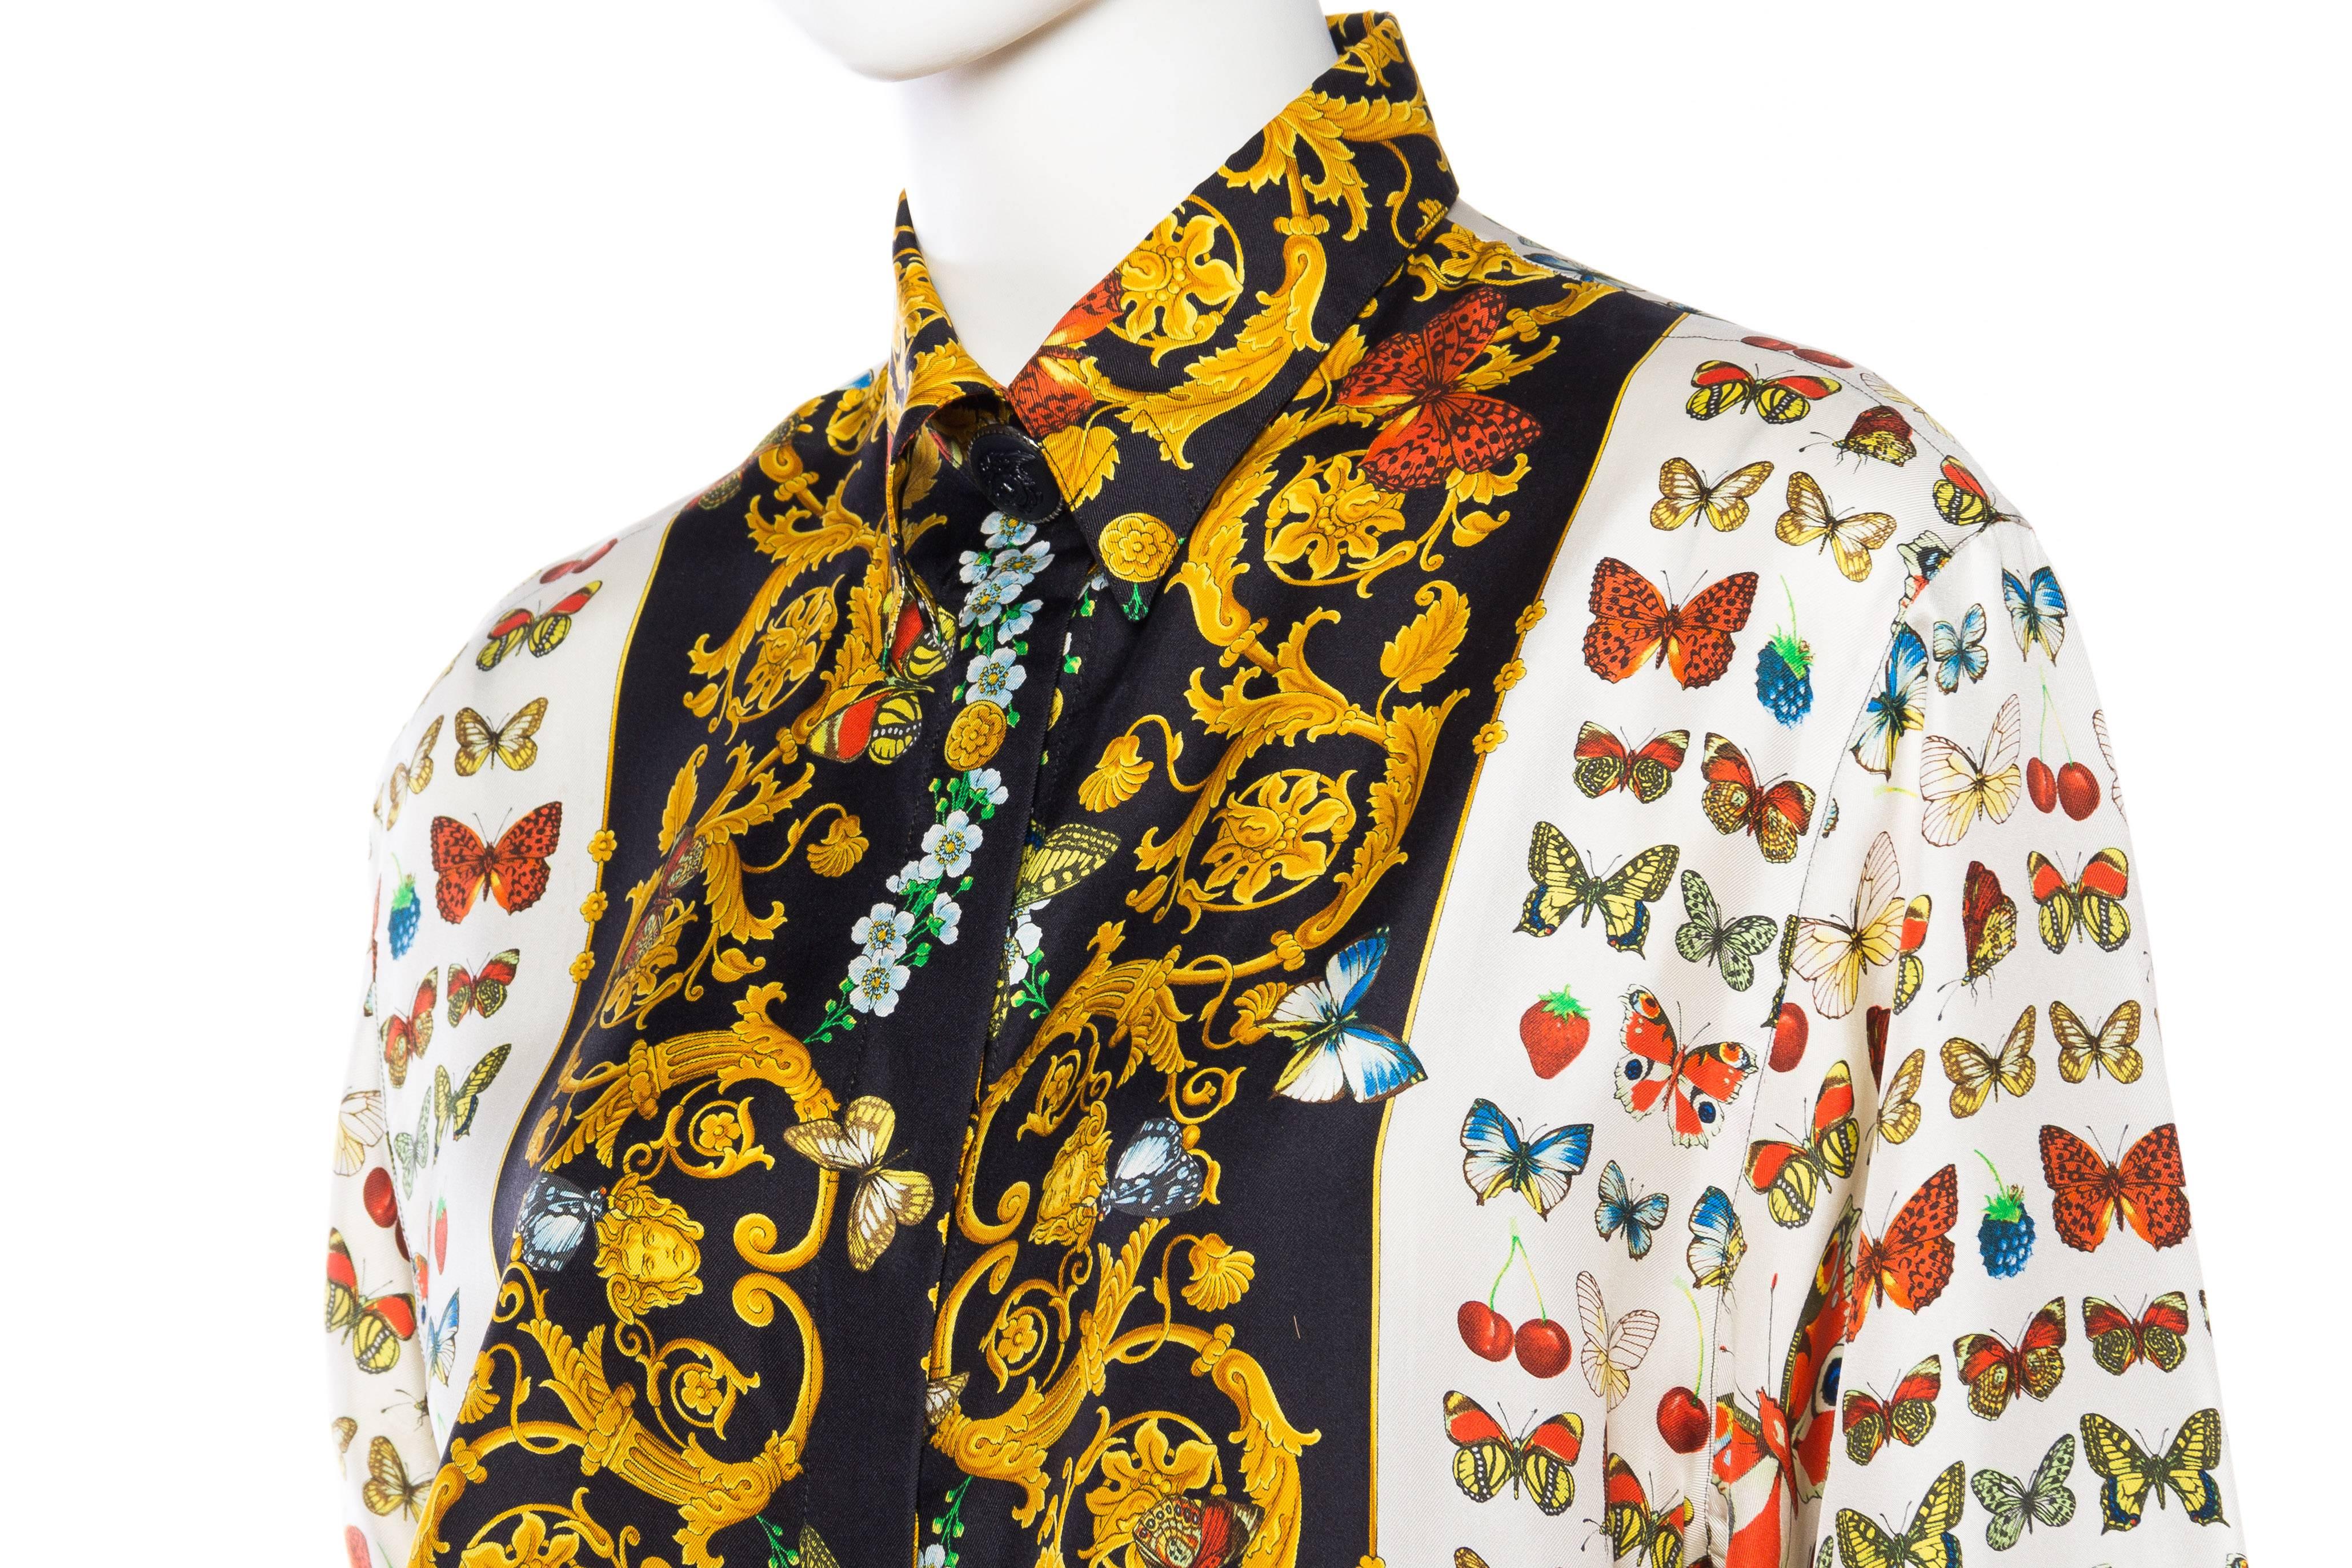 Women's or Men's 1990s Gianni Versace Couture Gold Rococo with Butterflies and iconic Medusa